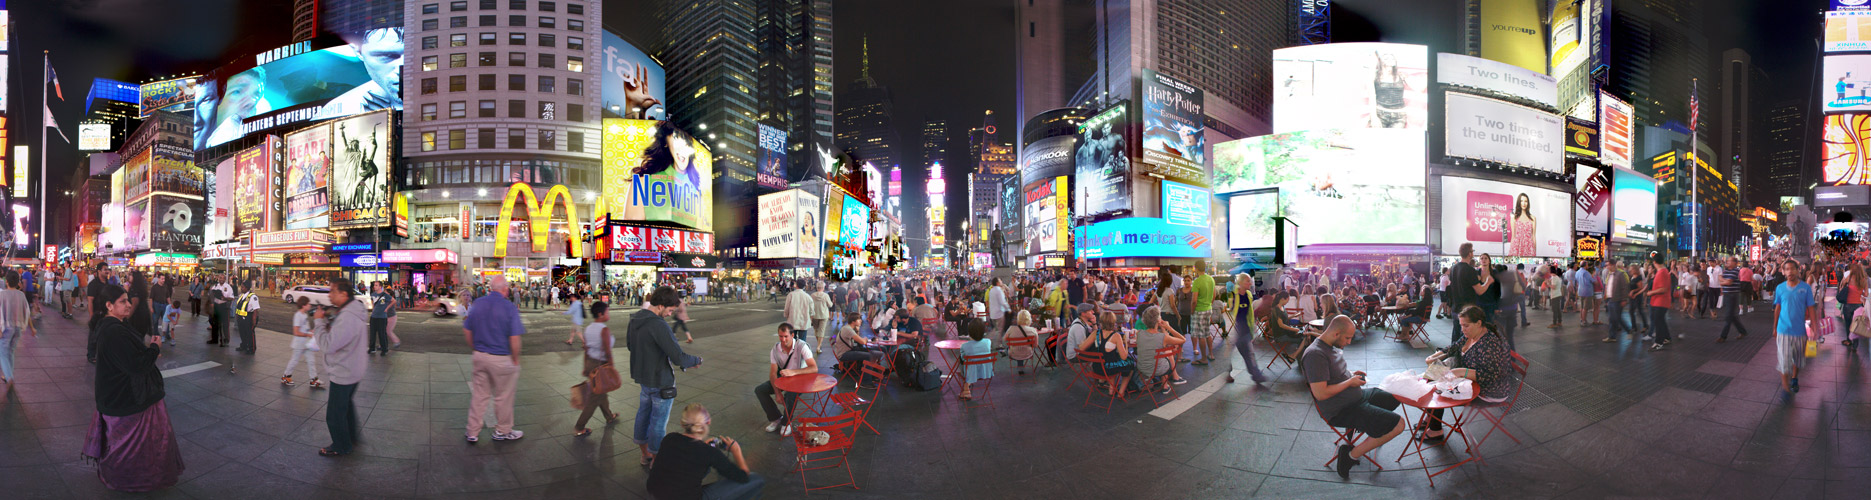 New York - 24 - Times Square 360°